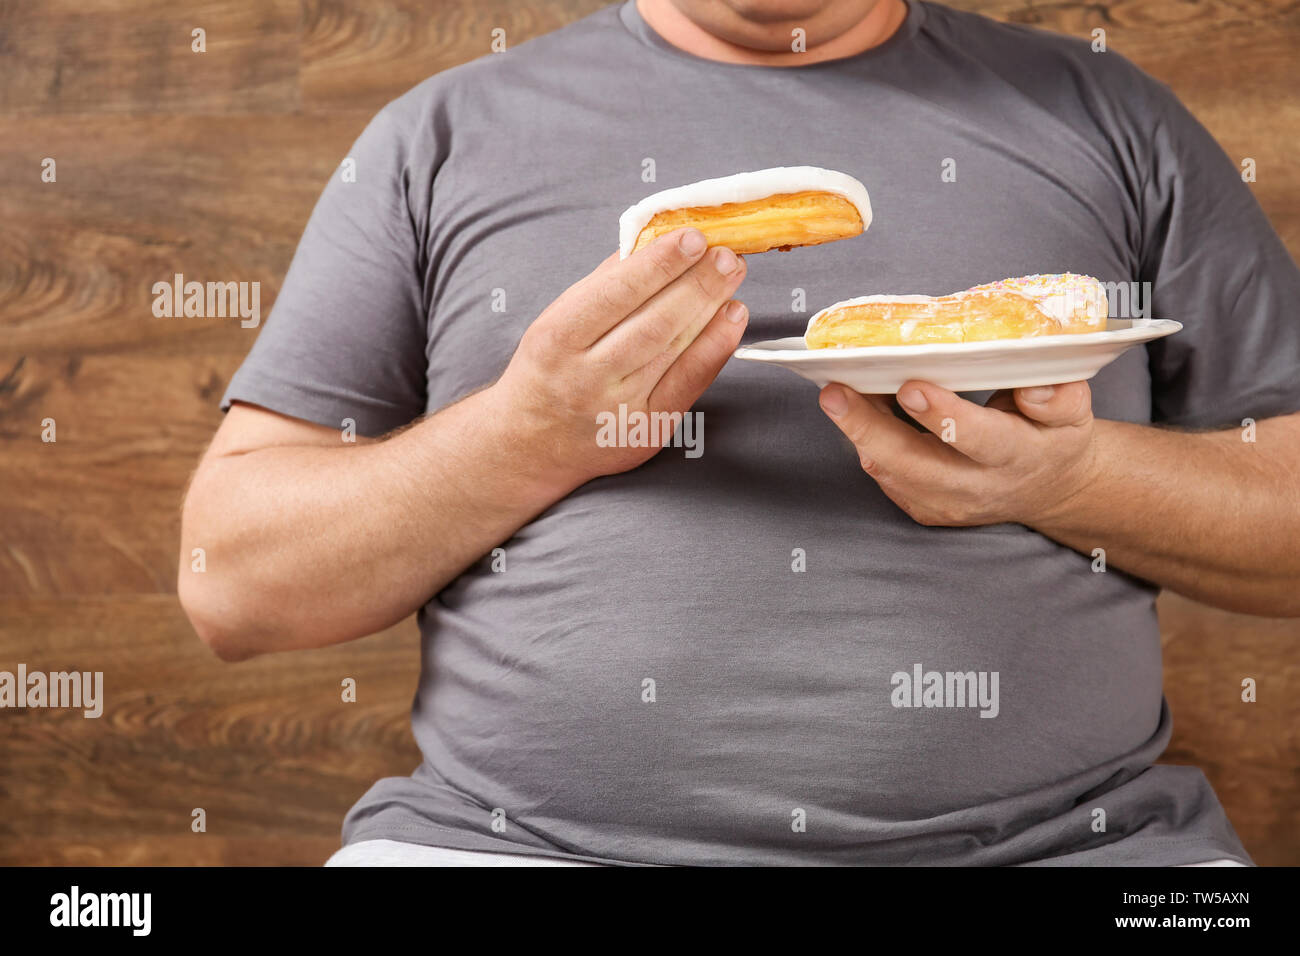 Overweight young man eating sweets on wooden background Stock Photo